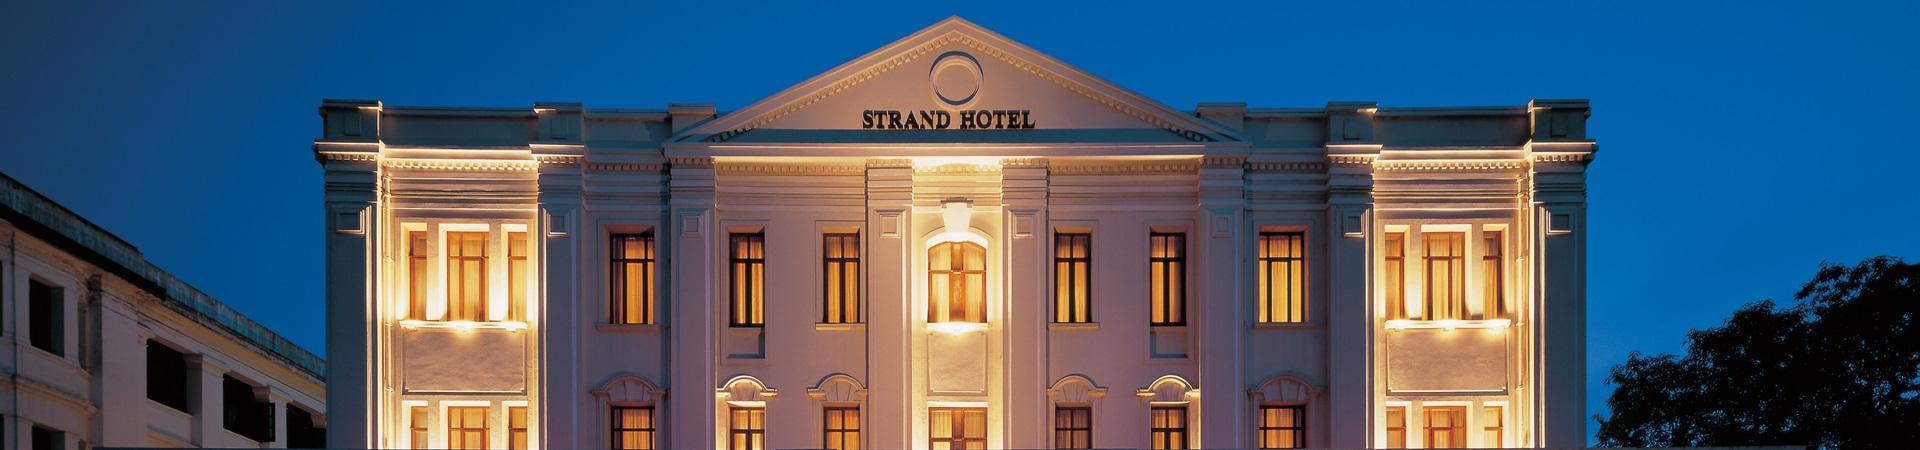 Image of The Strand Hotel